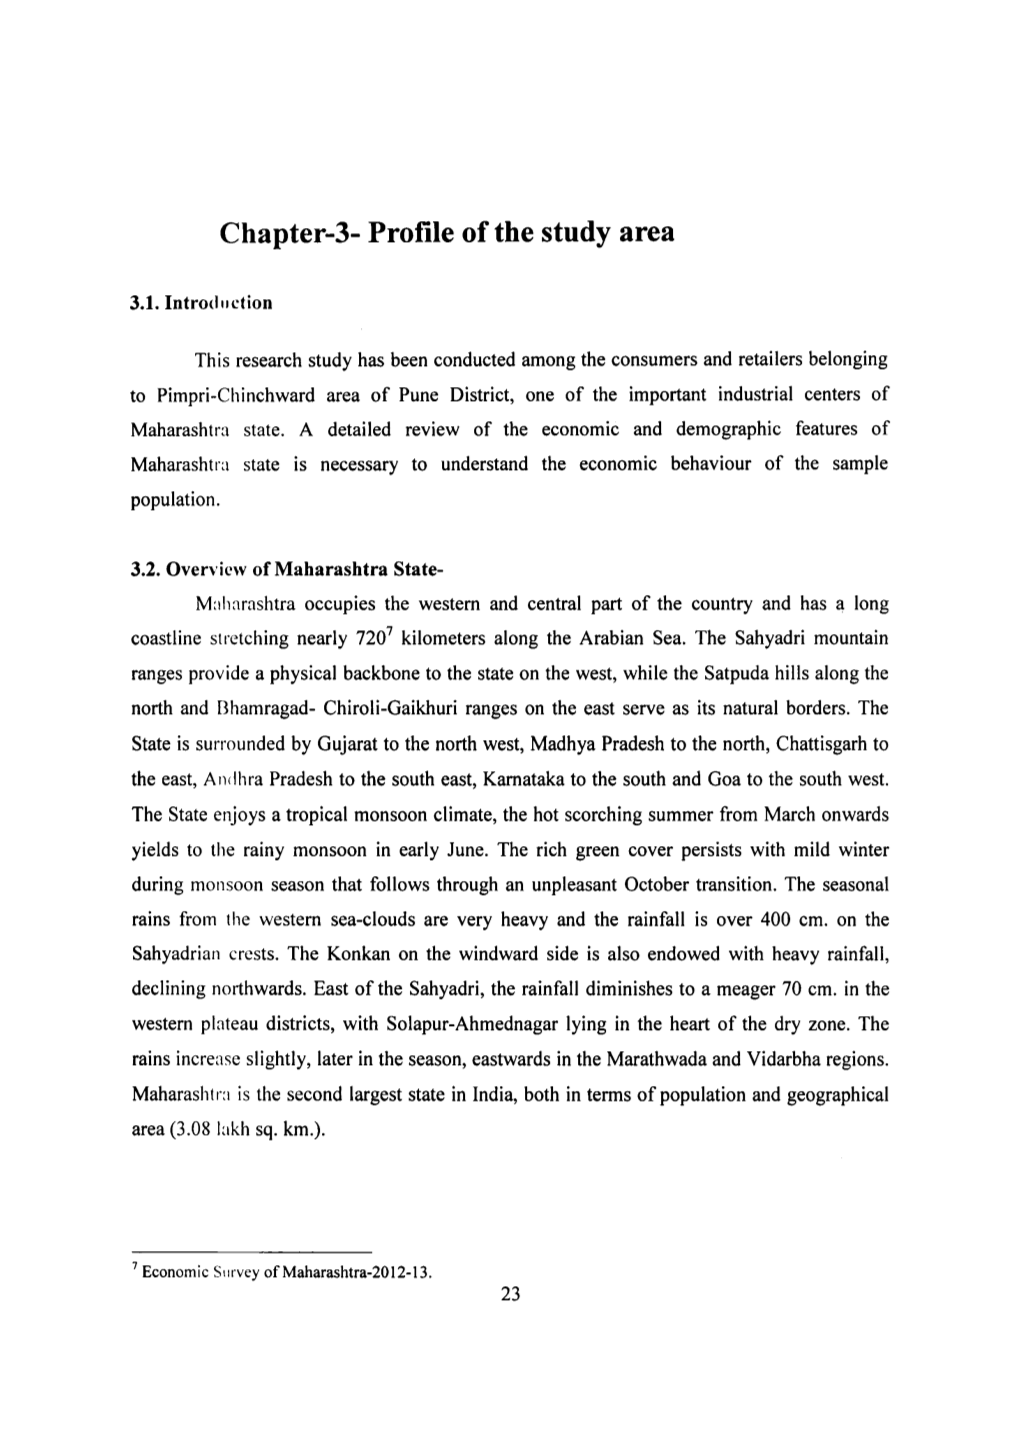 Chapter-3- Profile of the Study Area